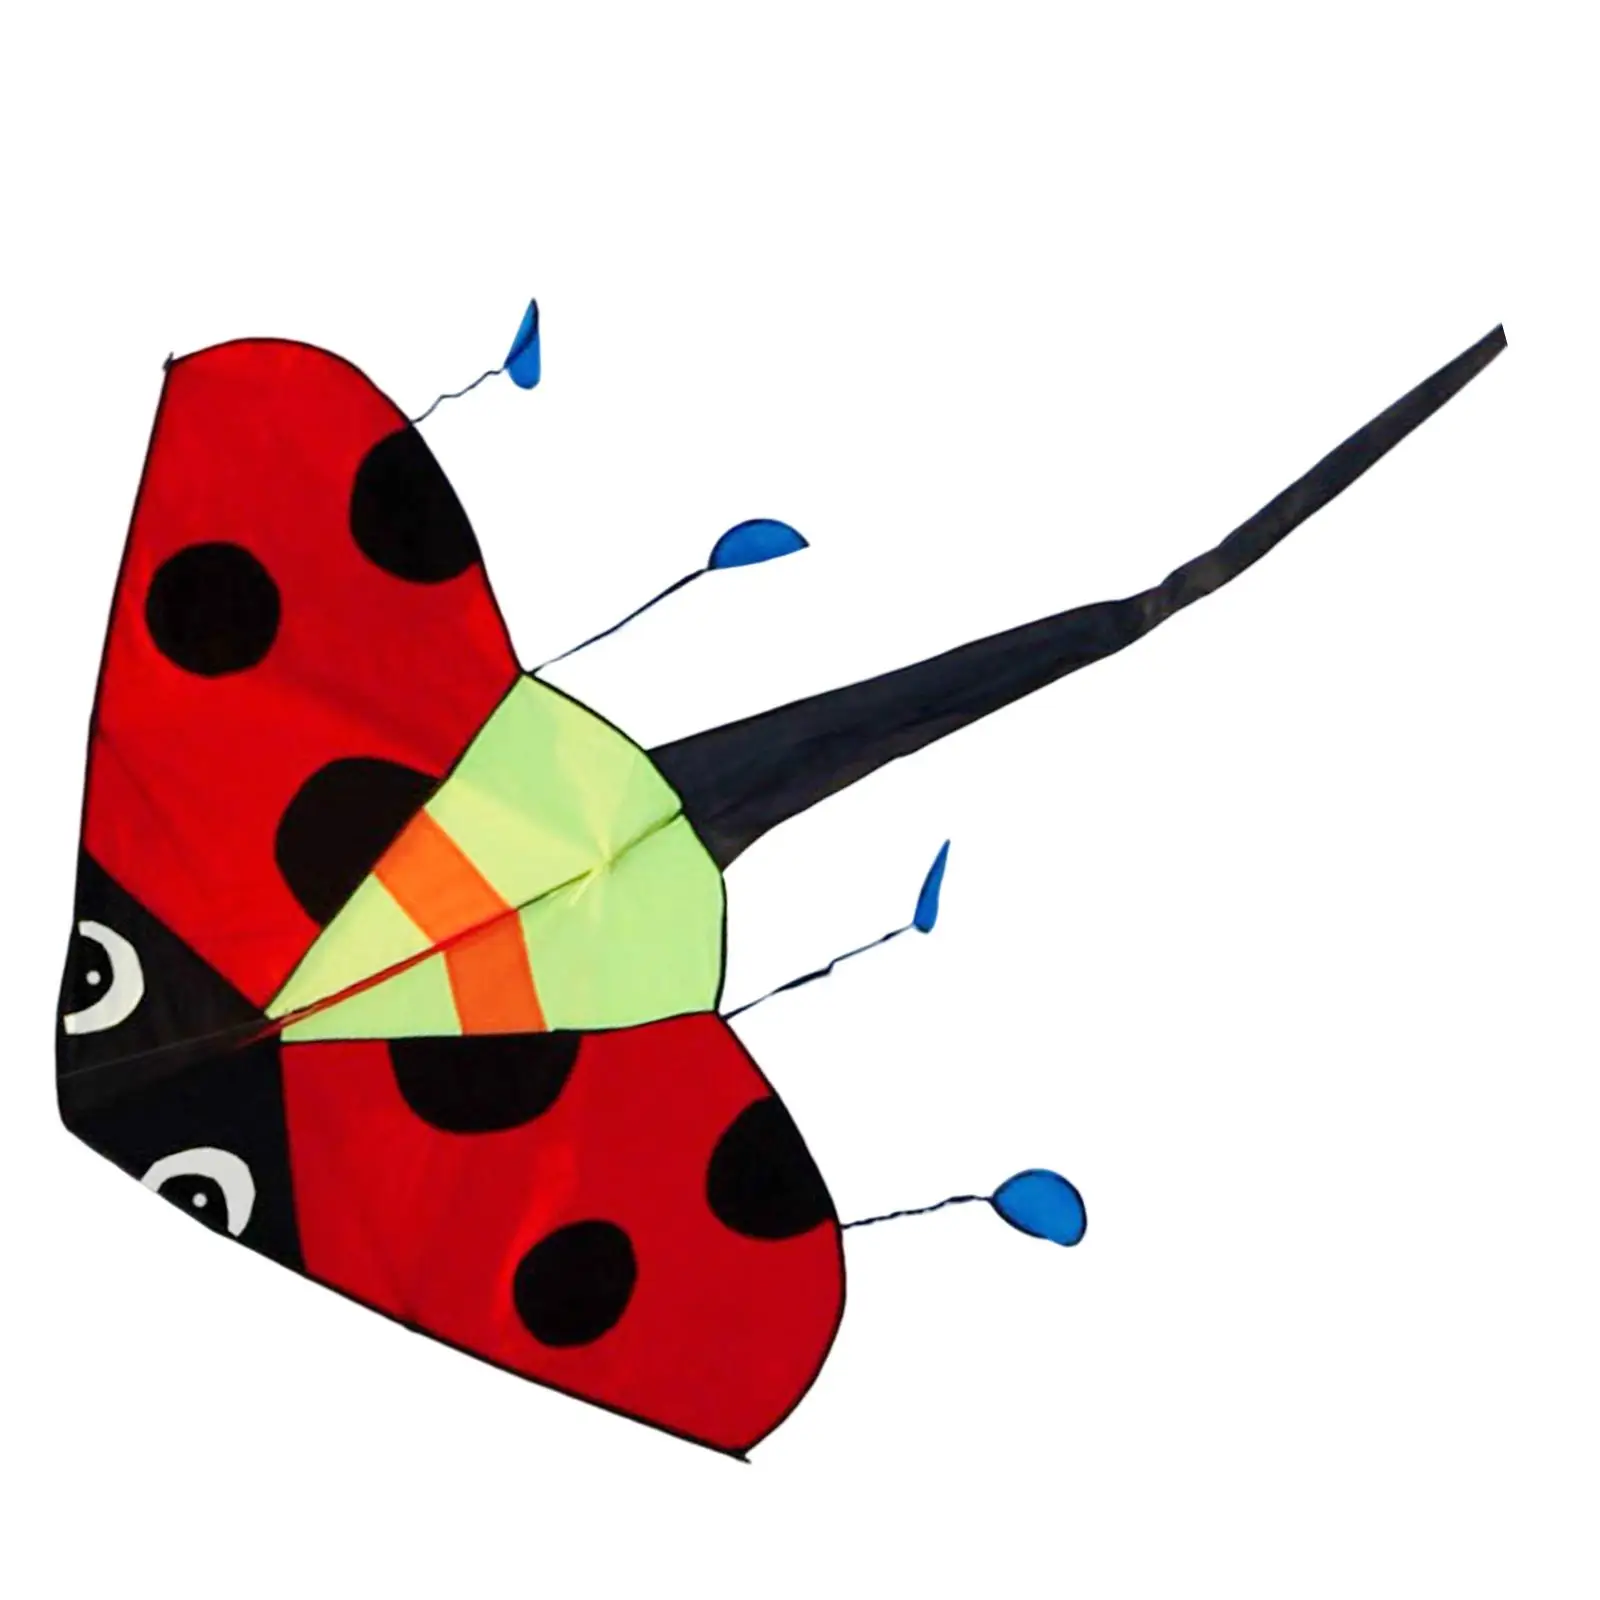 Colorful Delta Kite with String Huge Easy Single Line Fly Kite for Sports Teenagers Games Kids Adults